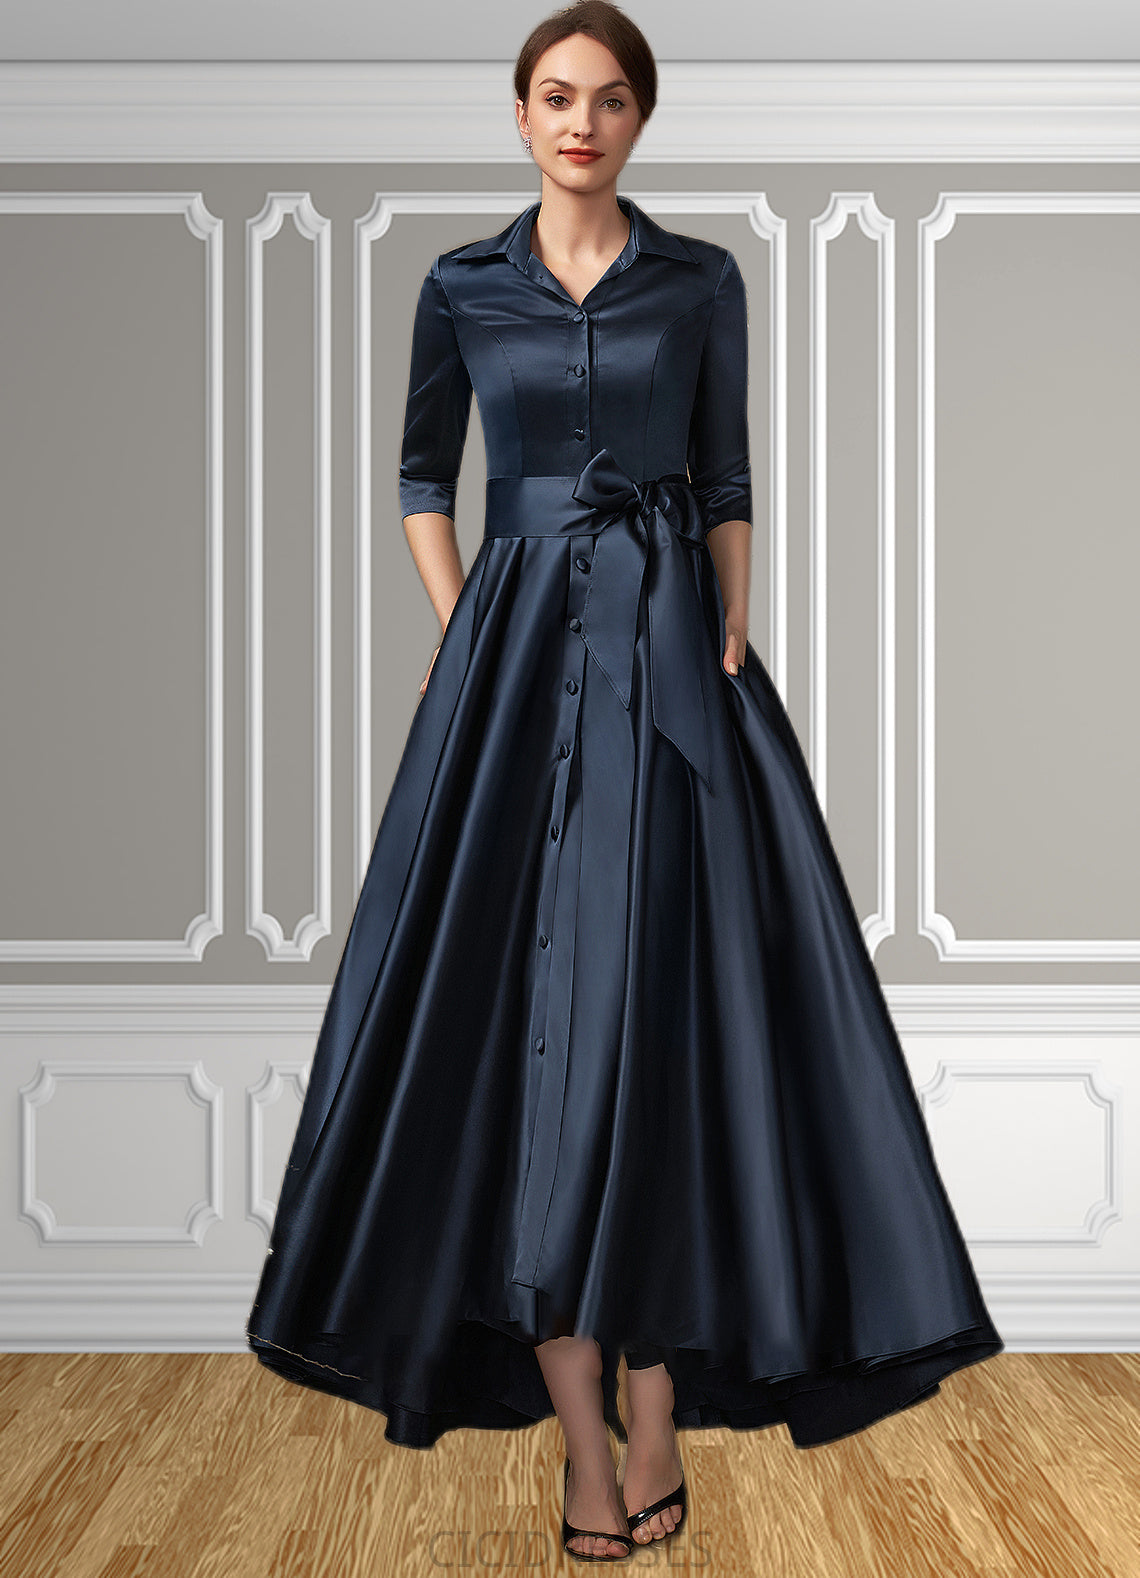 Taylor A-Line V-neck Asymmetrical Satin Mother of the Bride Dress With Bow(s) Pockets CIC8126P0014879